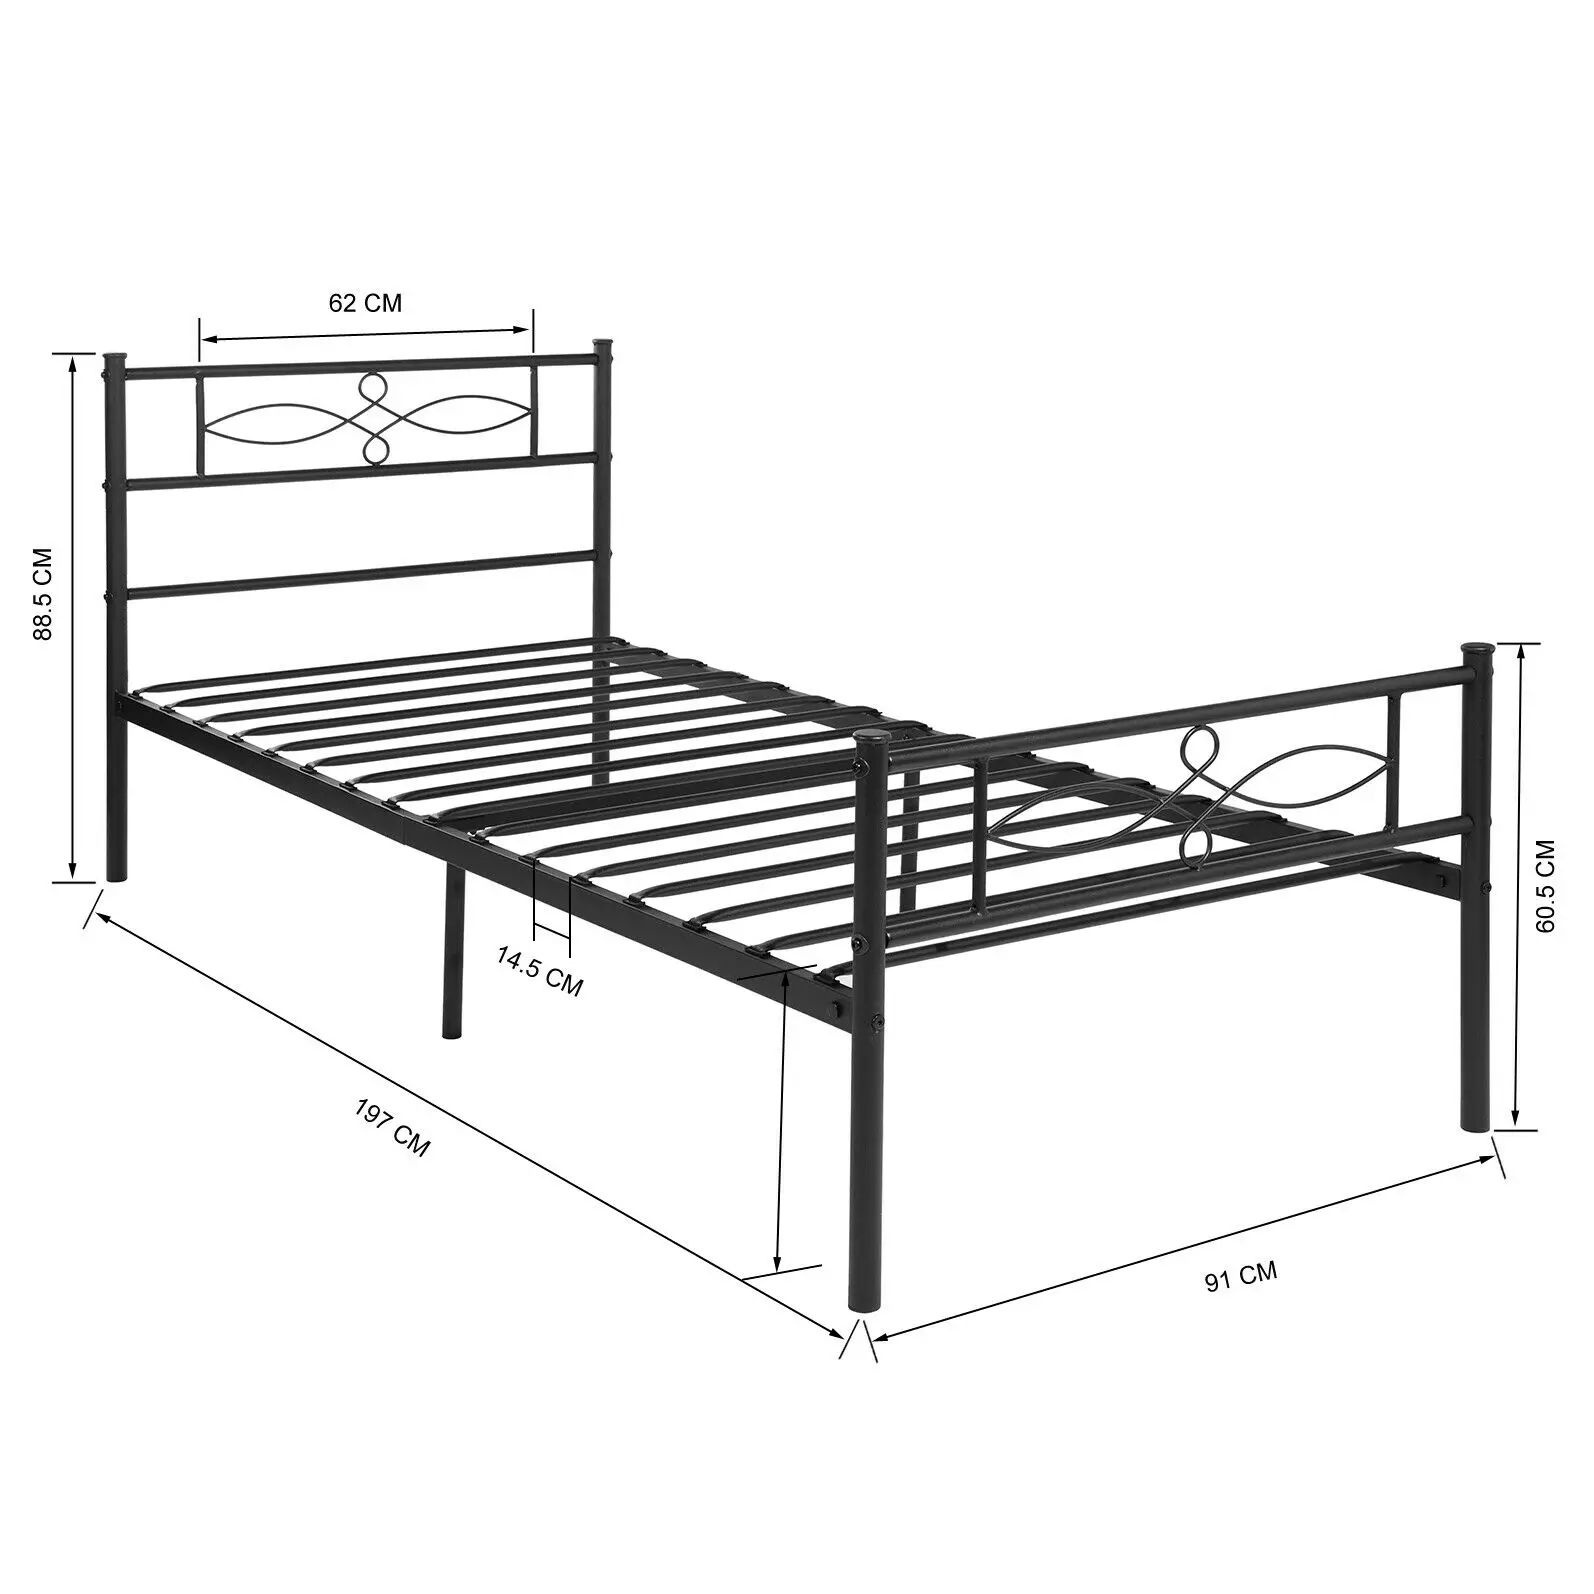 Hot sell metal bed frame /iron bed frame/King /queen/kid sized bedroom furniture